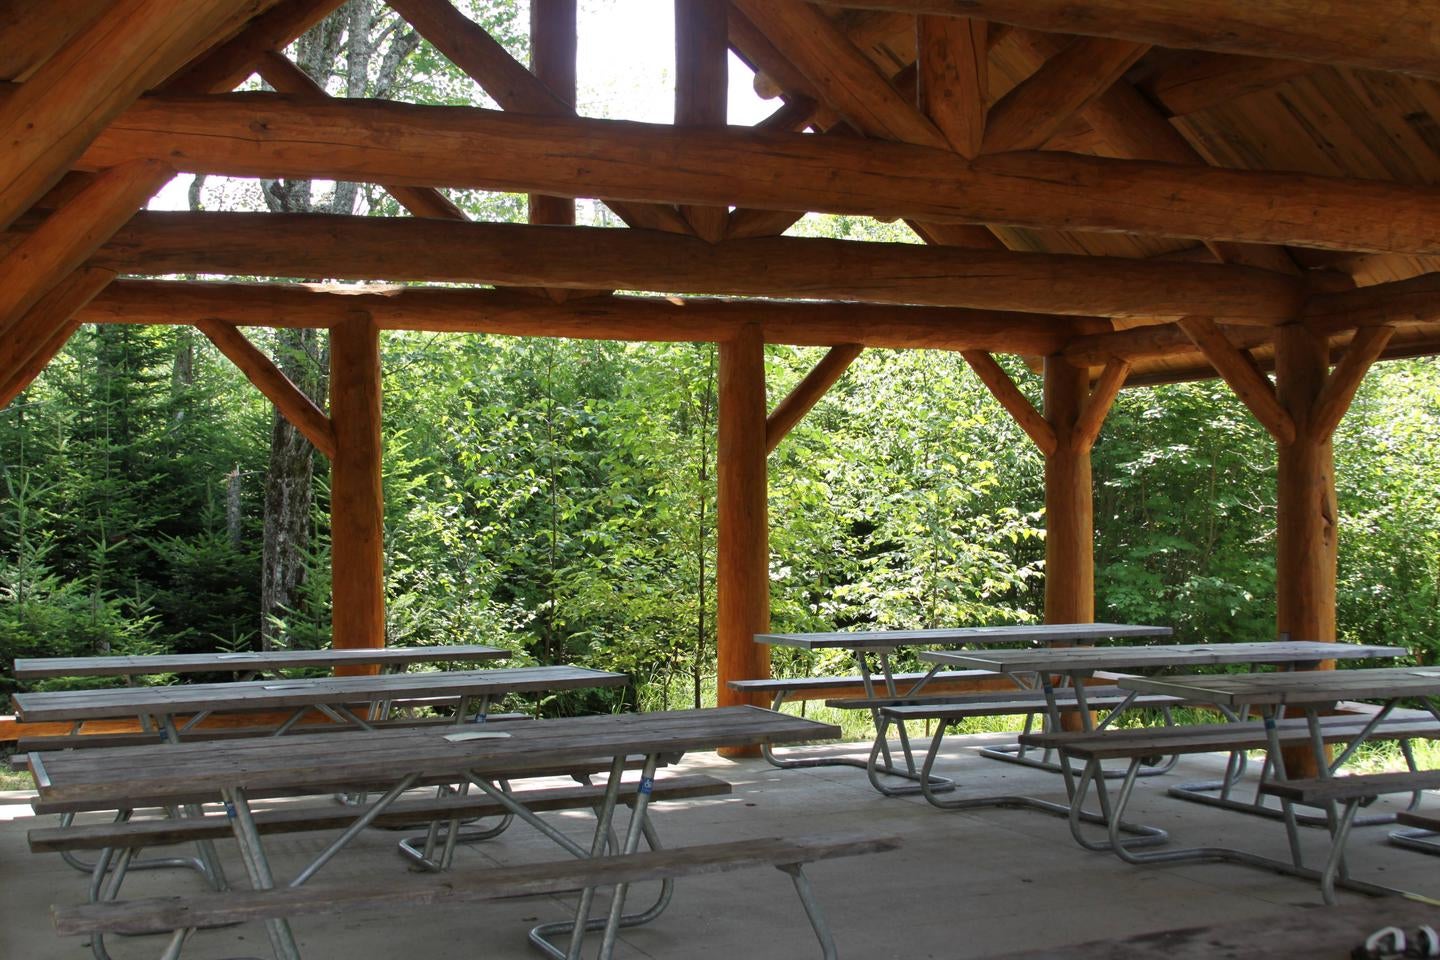 Interior view of log cabin style picnic pavilion with accessible picnic tables.



Pavilion for group campsites (Photo 2 of 2)

Credit: NPS